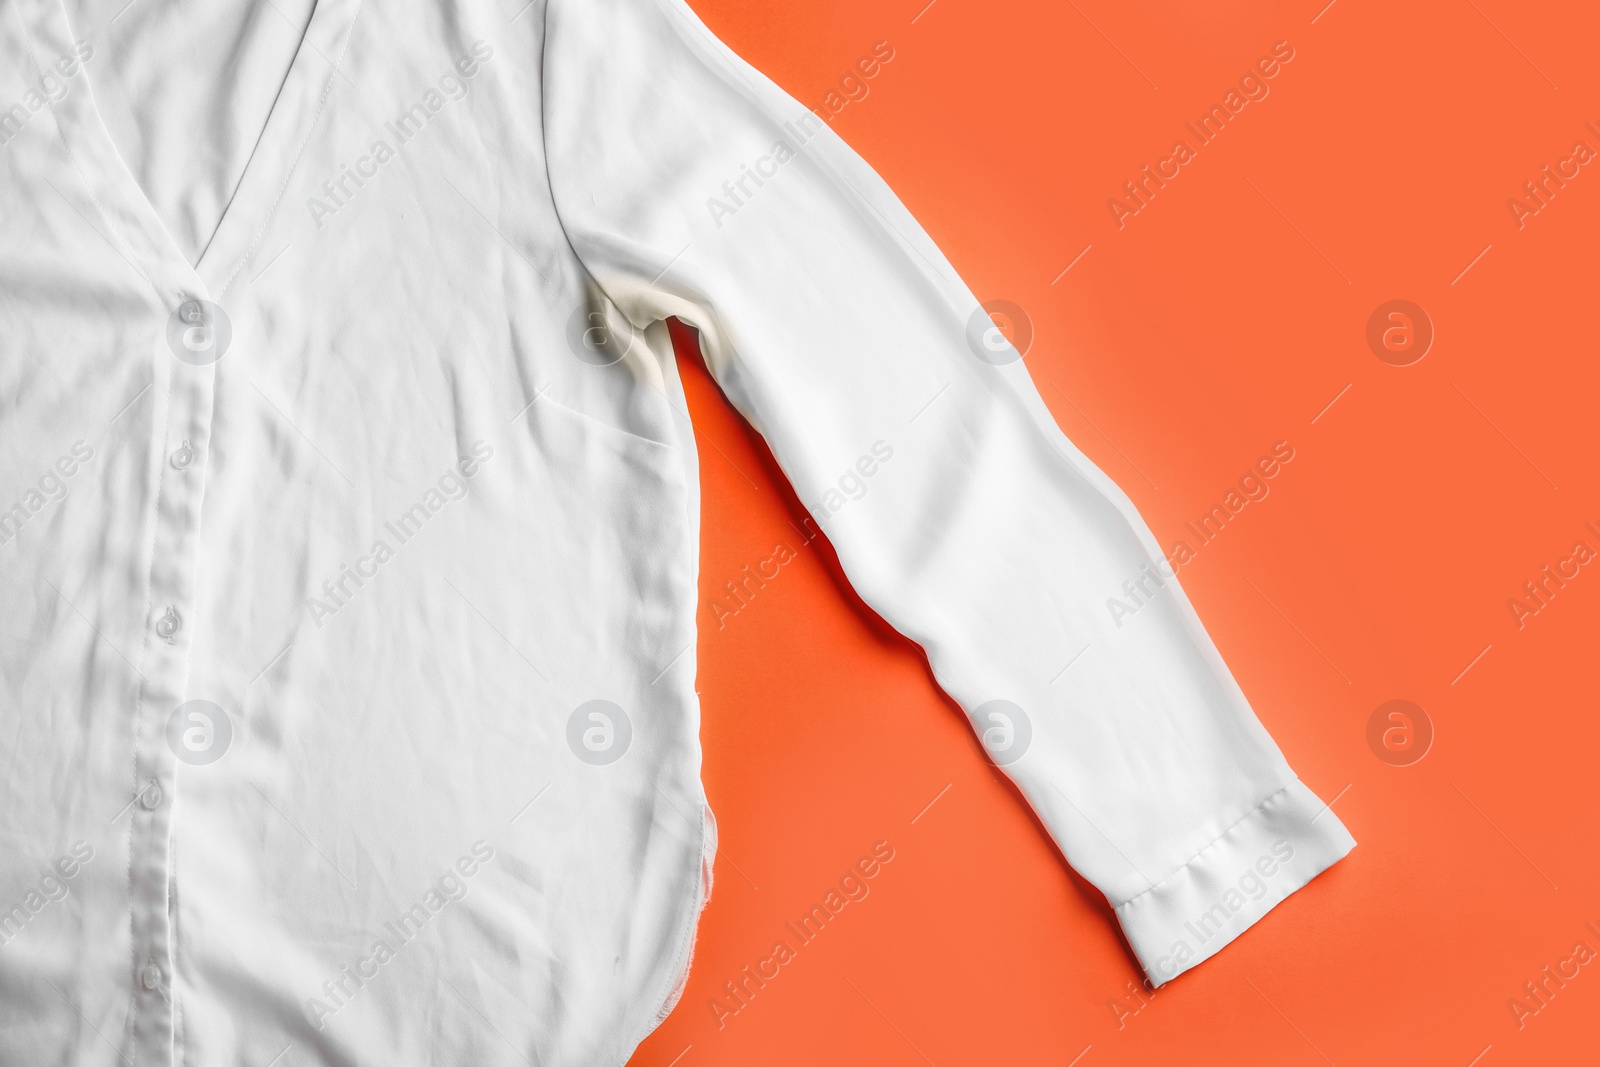 Photo of Shirt with deodorant stain on coral background, top view